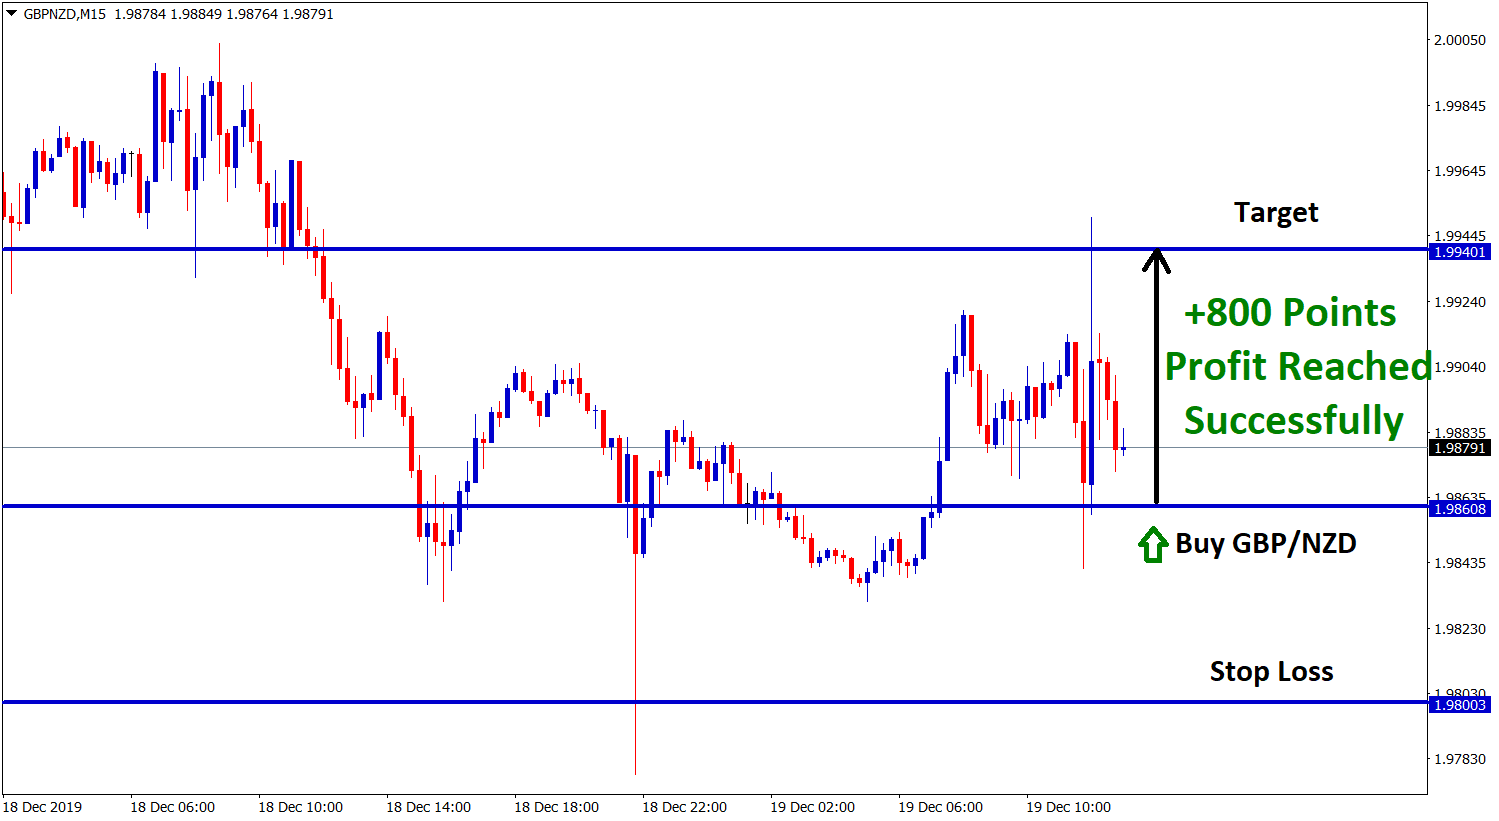 gbp nzd buy signal reached the take profit